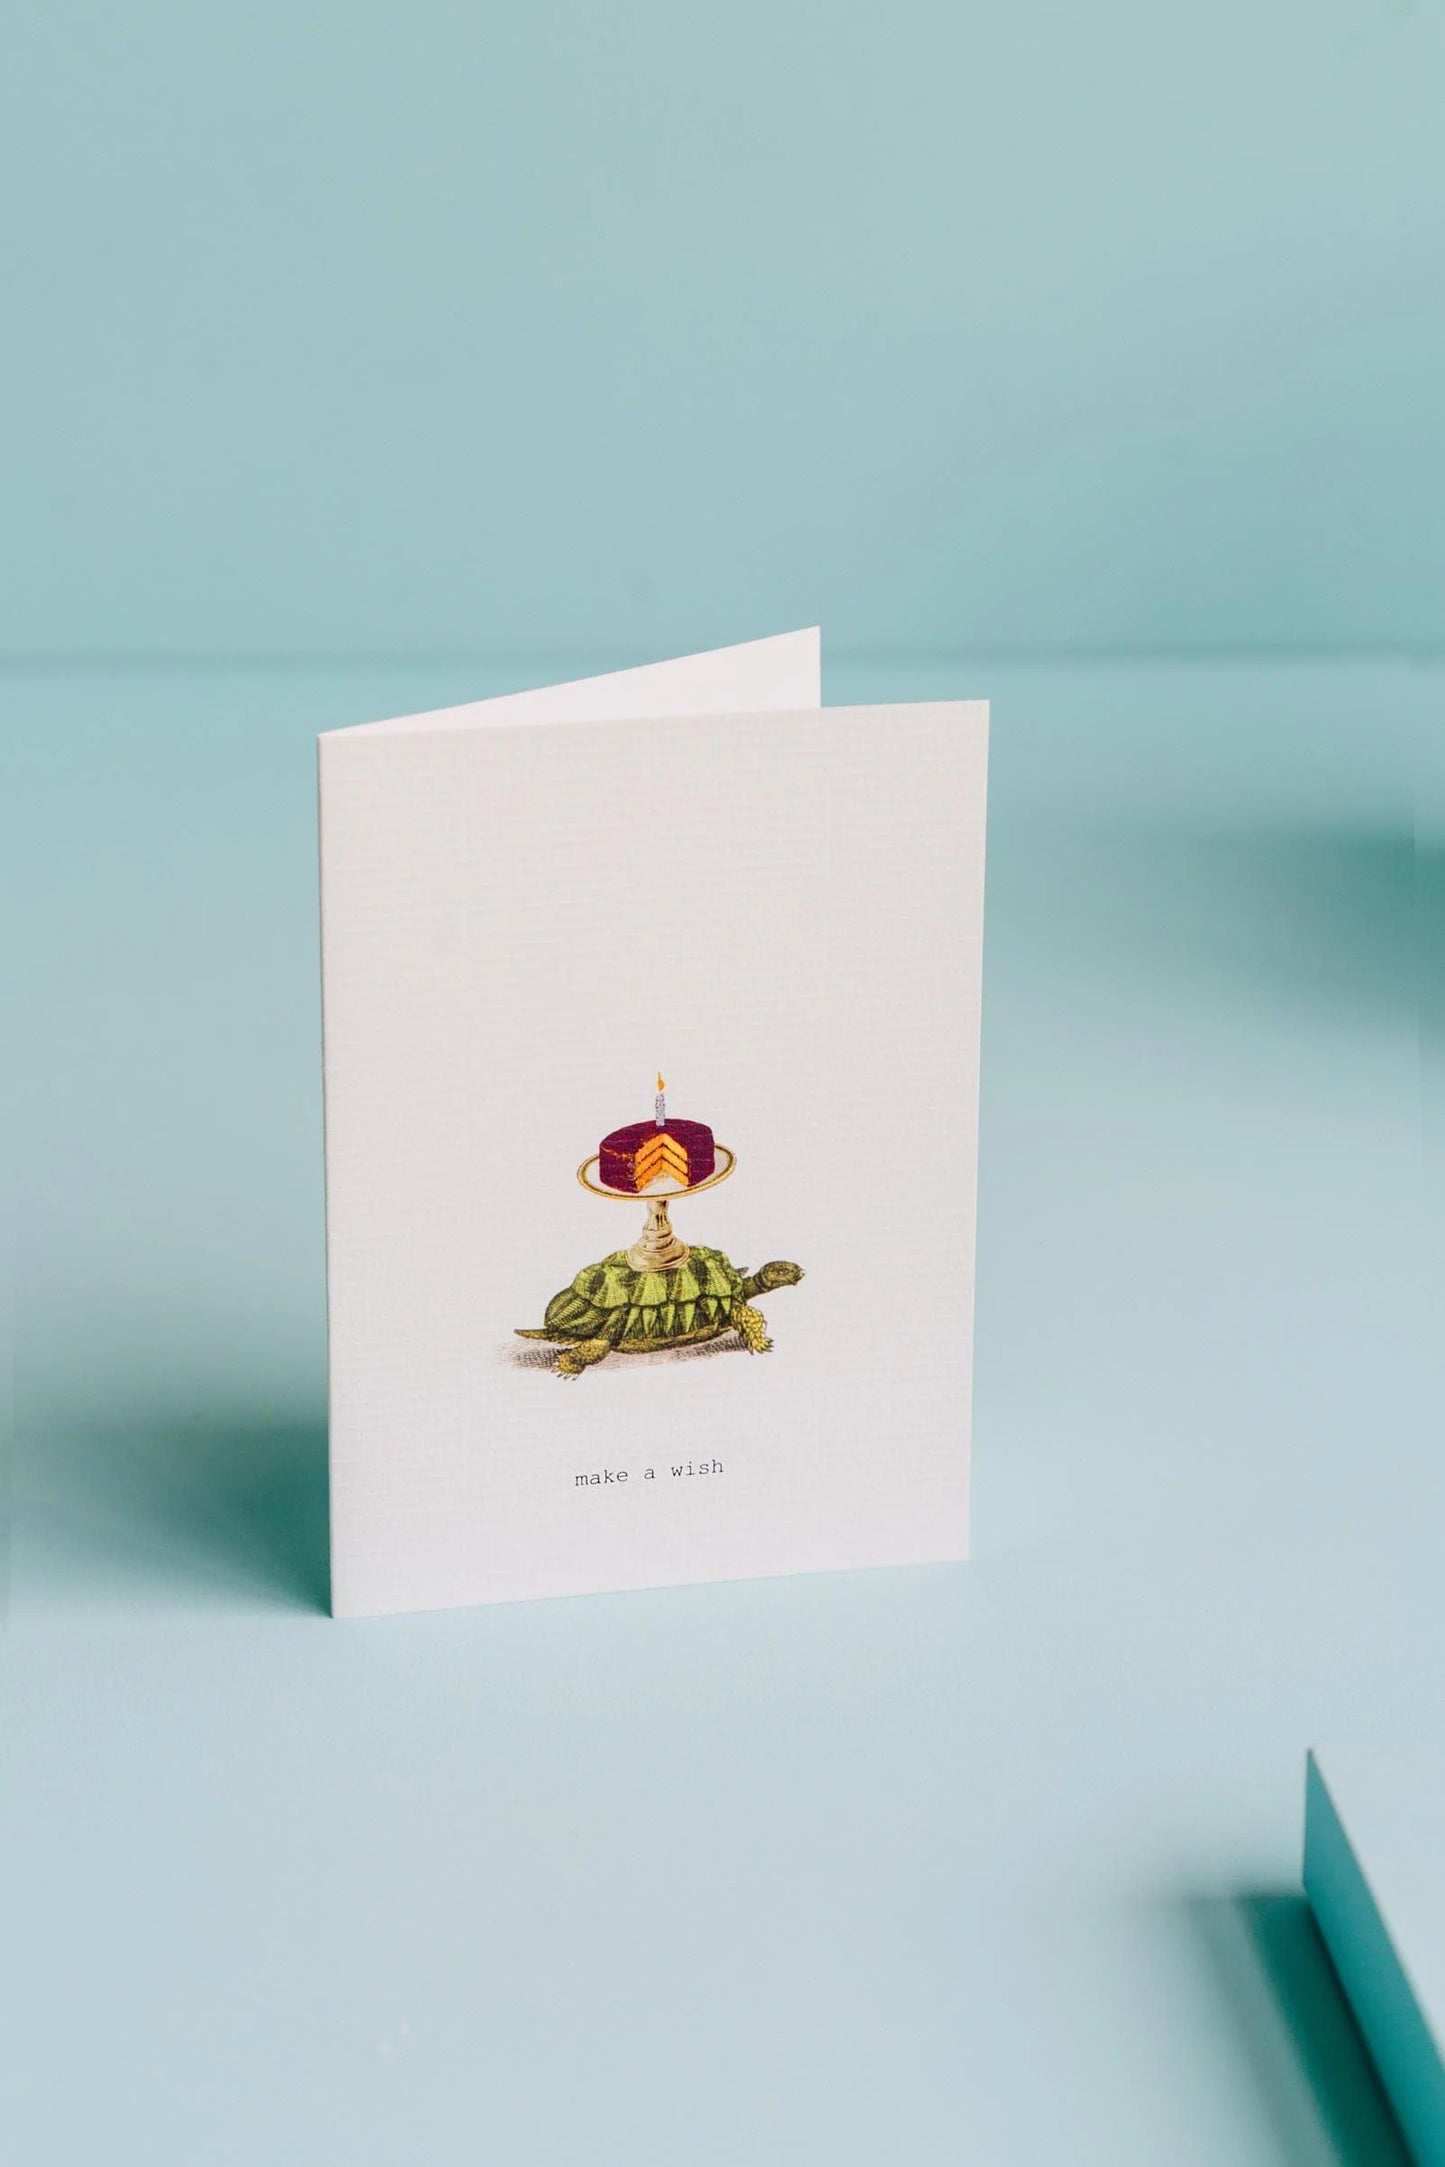 make a wish greeting card with a turtle and cake illustration